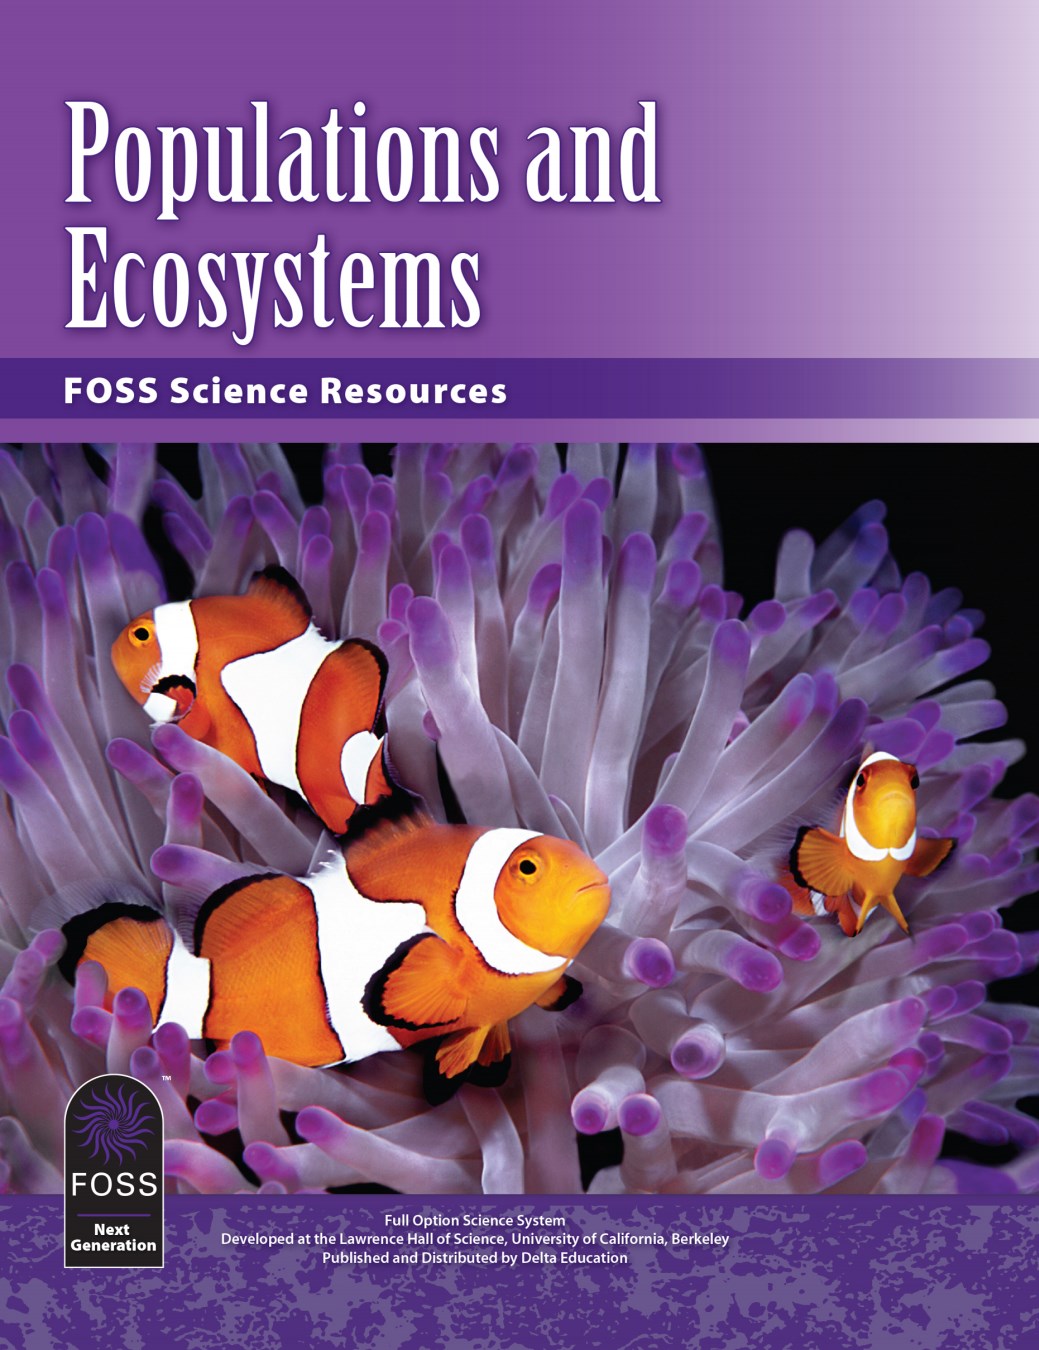 Populations and Ecosystems - FOSS® Next Generation™